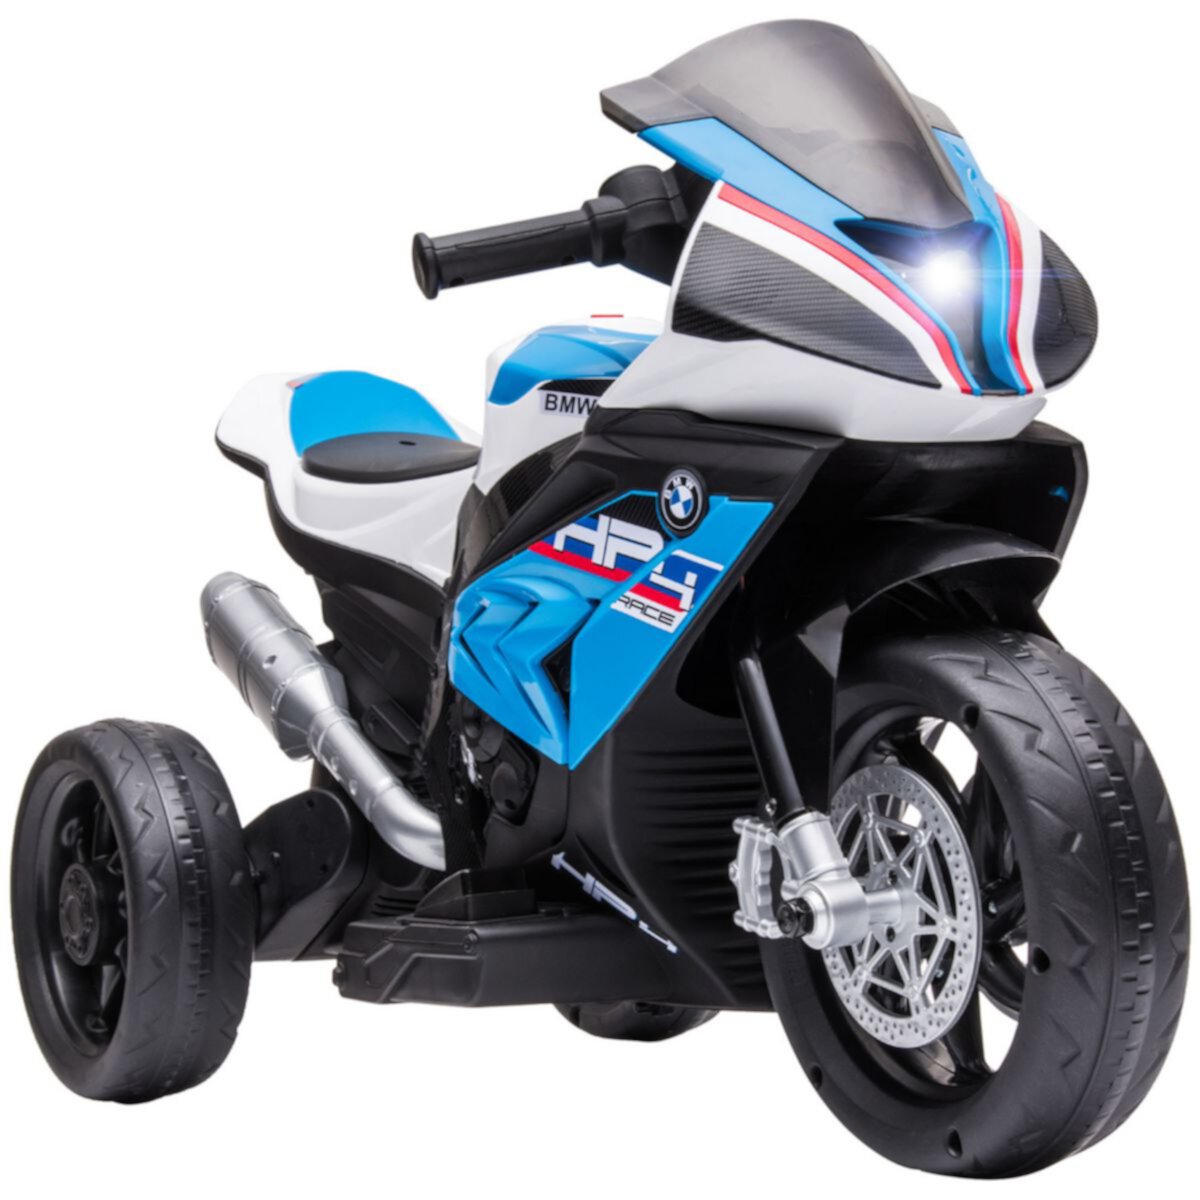 Aosom Licensed BMW HP4 Multi-Terrain Kids Motorcycle Ride-on Toy for Toddlers and Ages 1.5 to 5, Off-Road Battery-Operated Ride-on Vehicle, Mini Motorbike for Kids, Blue Aosom